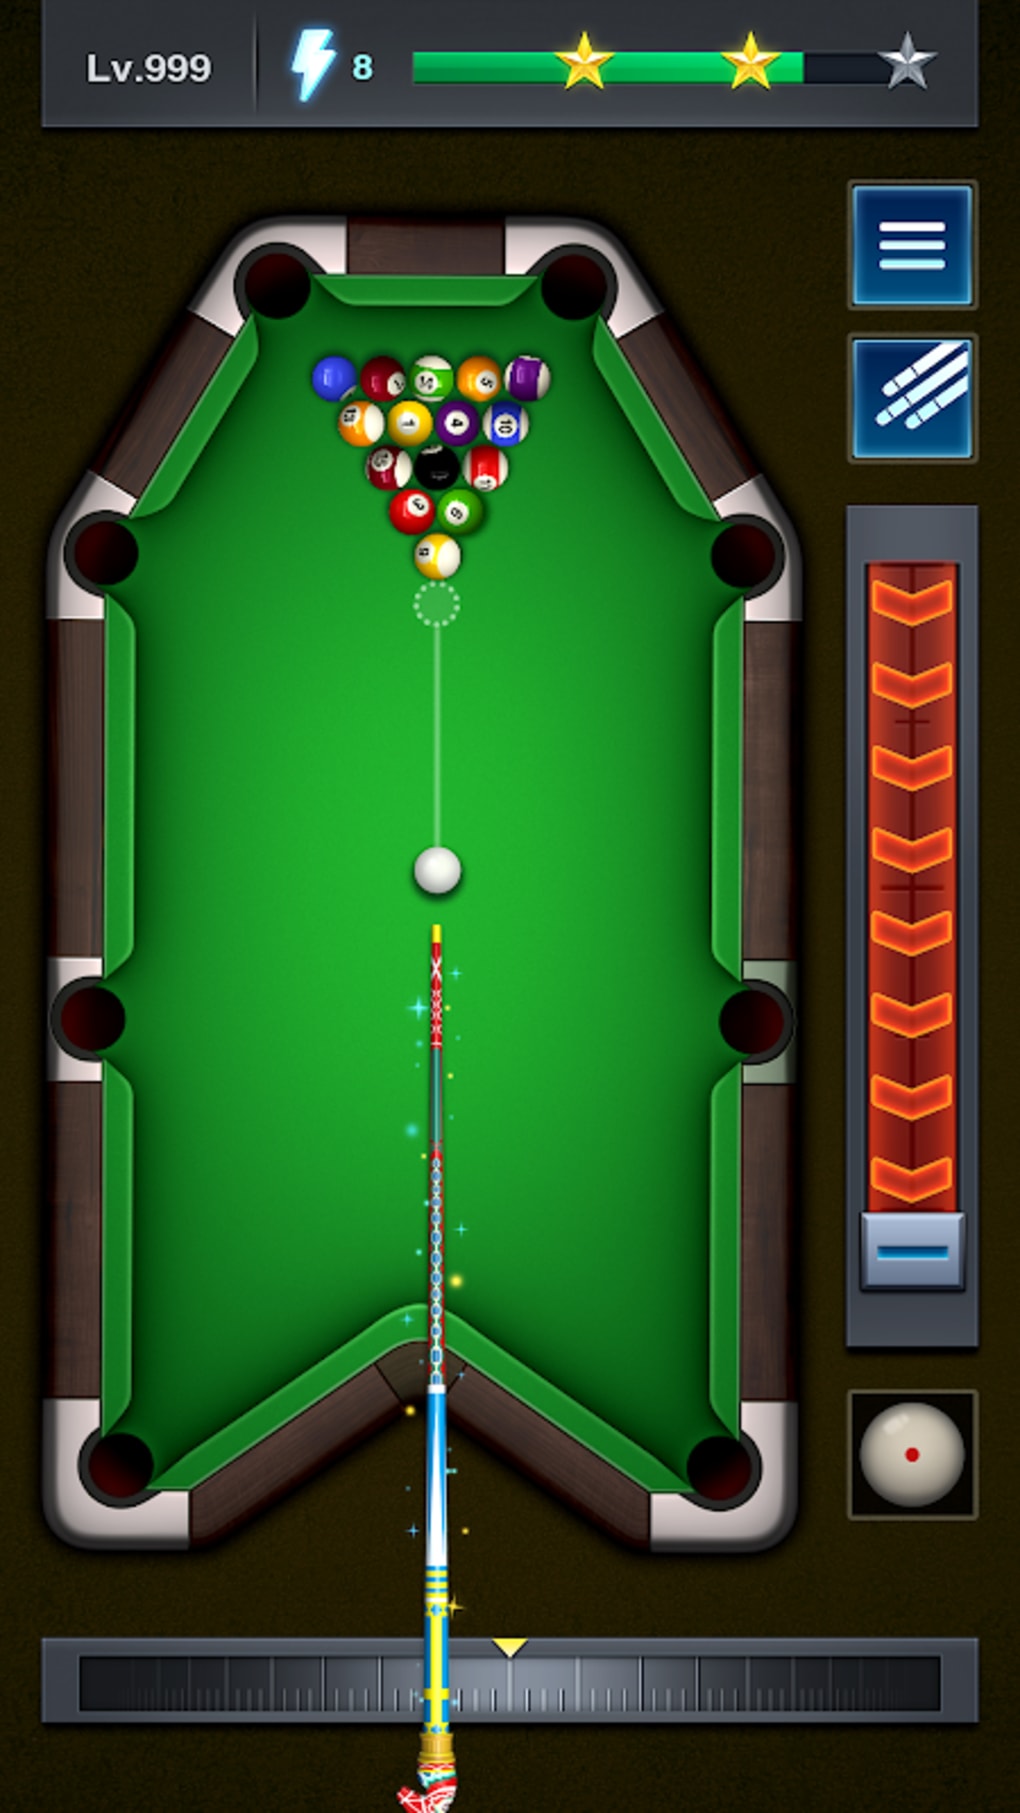 Billiards Online Game for Android - Download